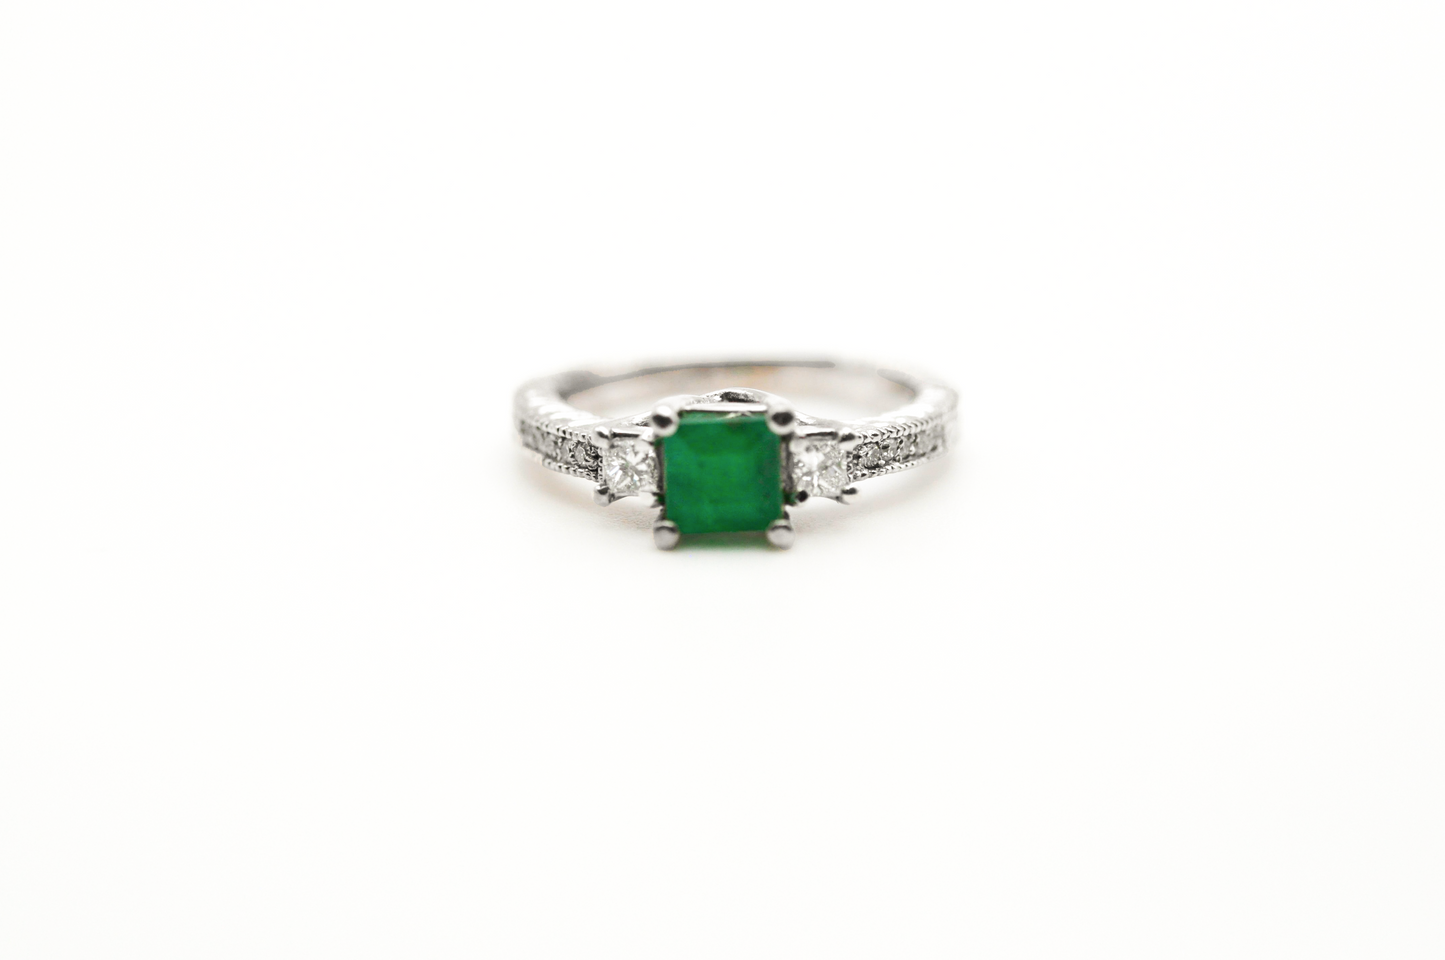 White Gold Emerald Ring with 2 Diamonds Side Stones